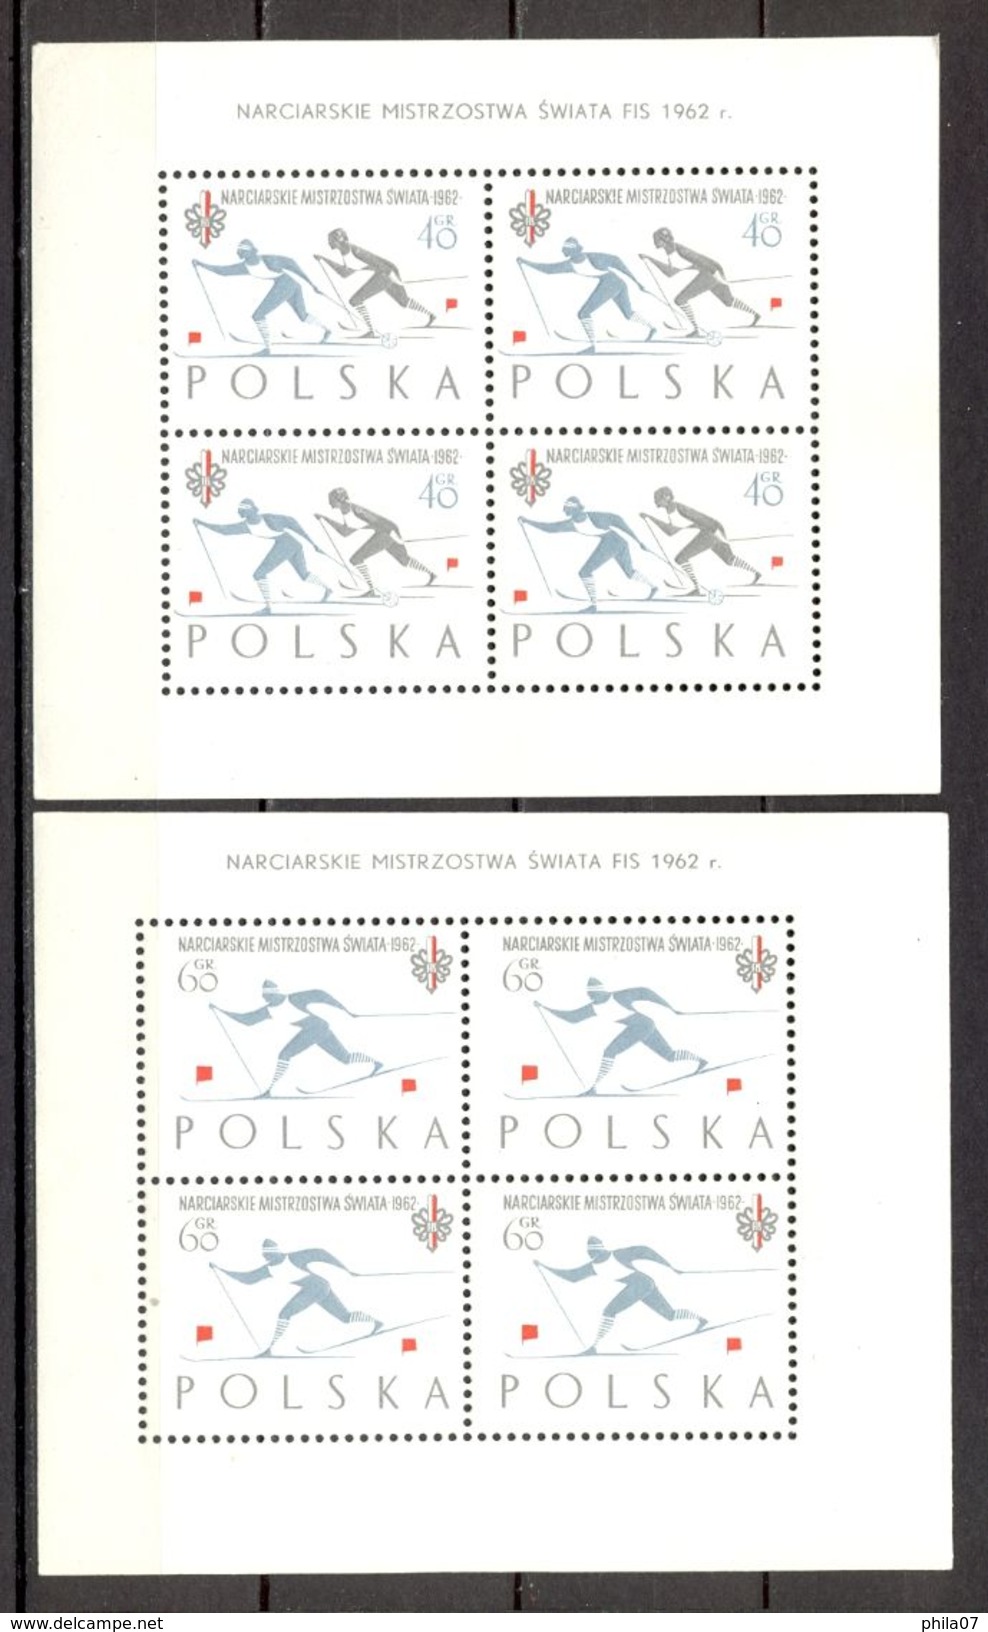 Poland - 1962, SWIATA FIS, Two Blocks, Sheet And Series, All MNH. / See Scans, 5 Scans - Neufs